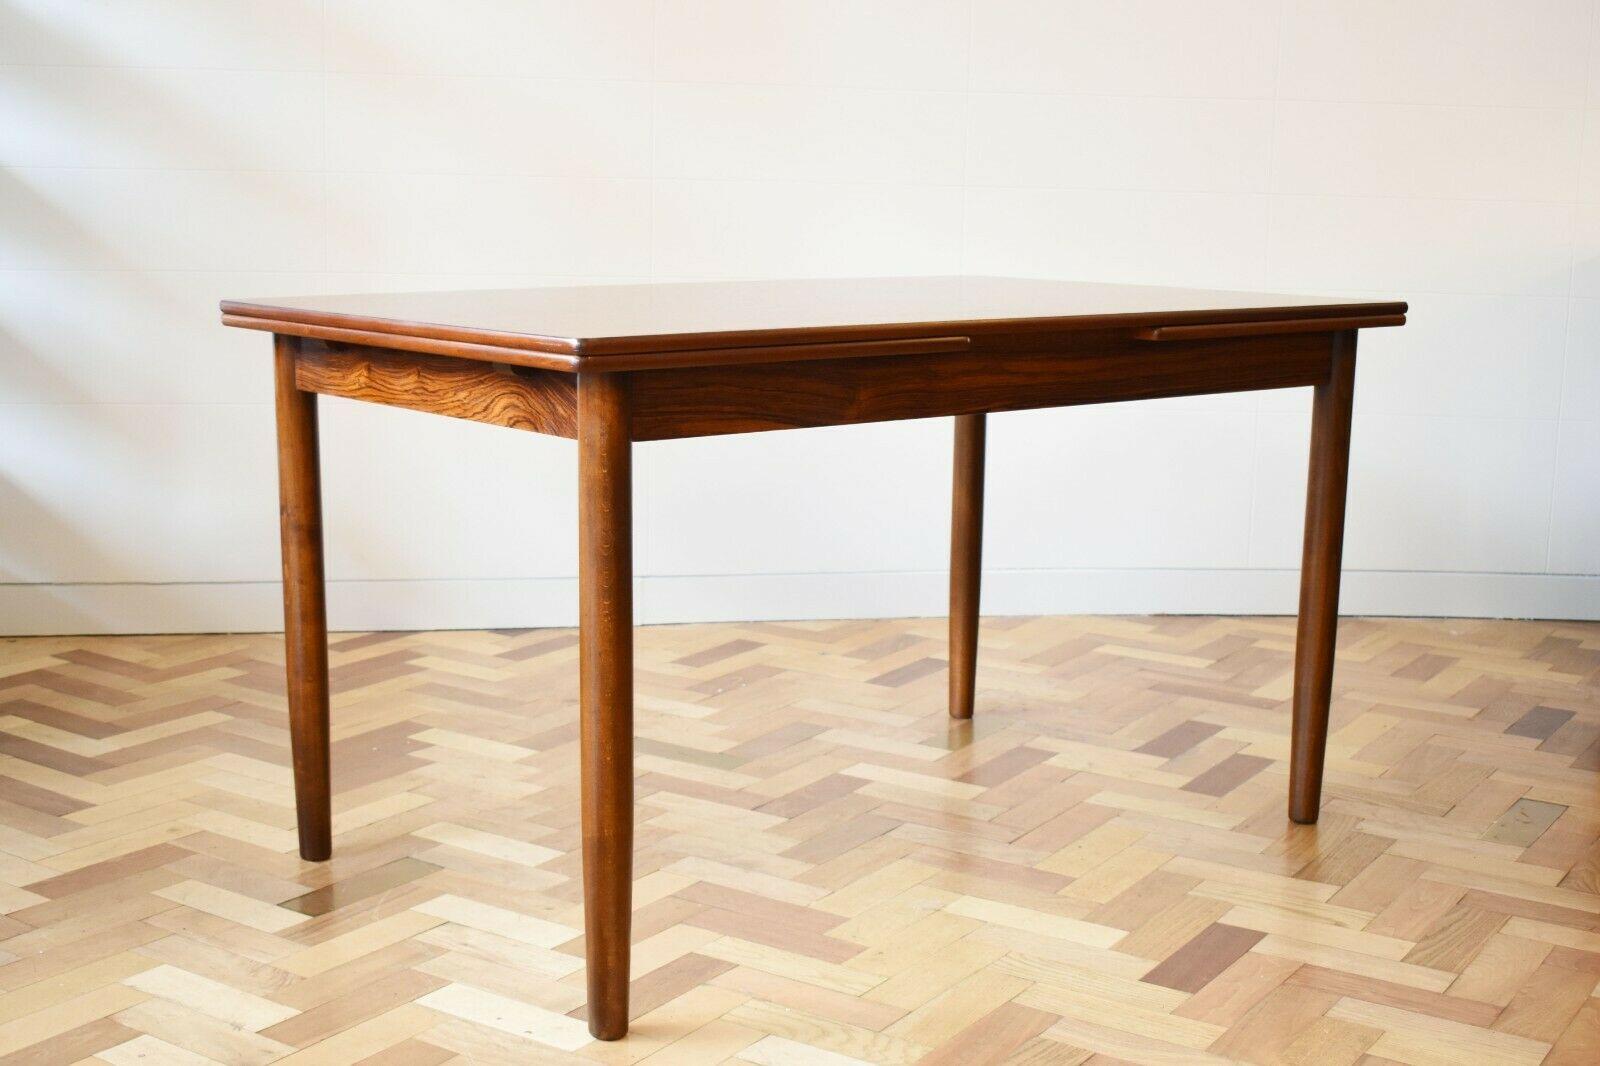 1960's Danish rosewood extendable dining table, set on tall thin legs. Elegant and sleek, the wood is in beautiful condition, and has been newly polished.